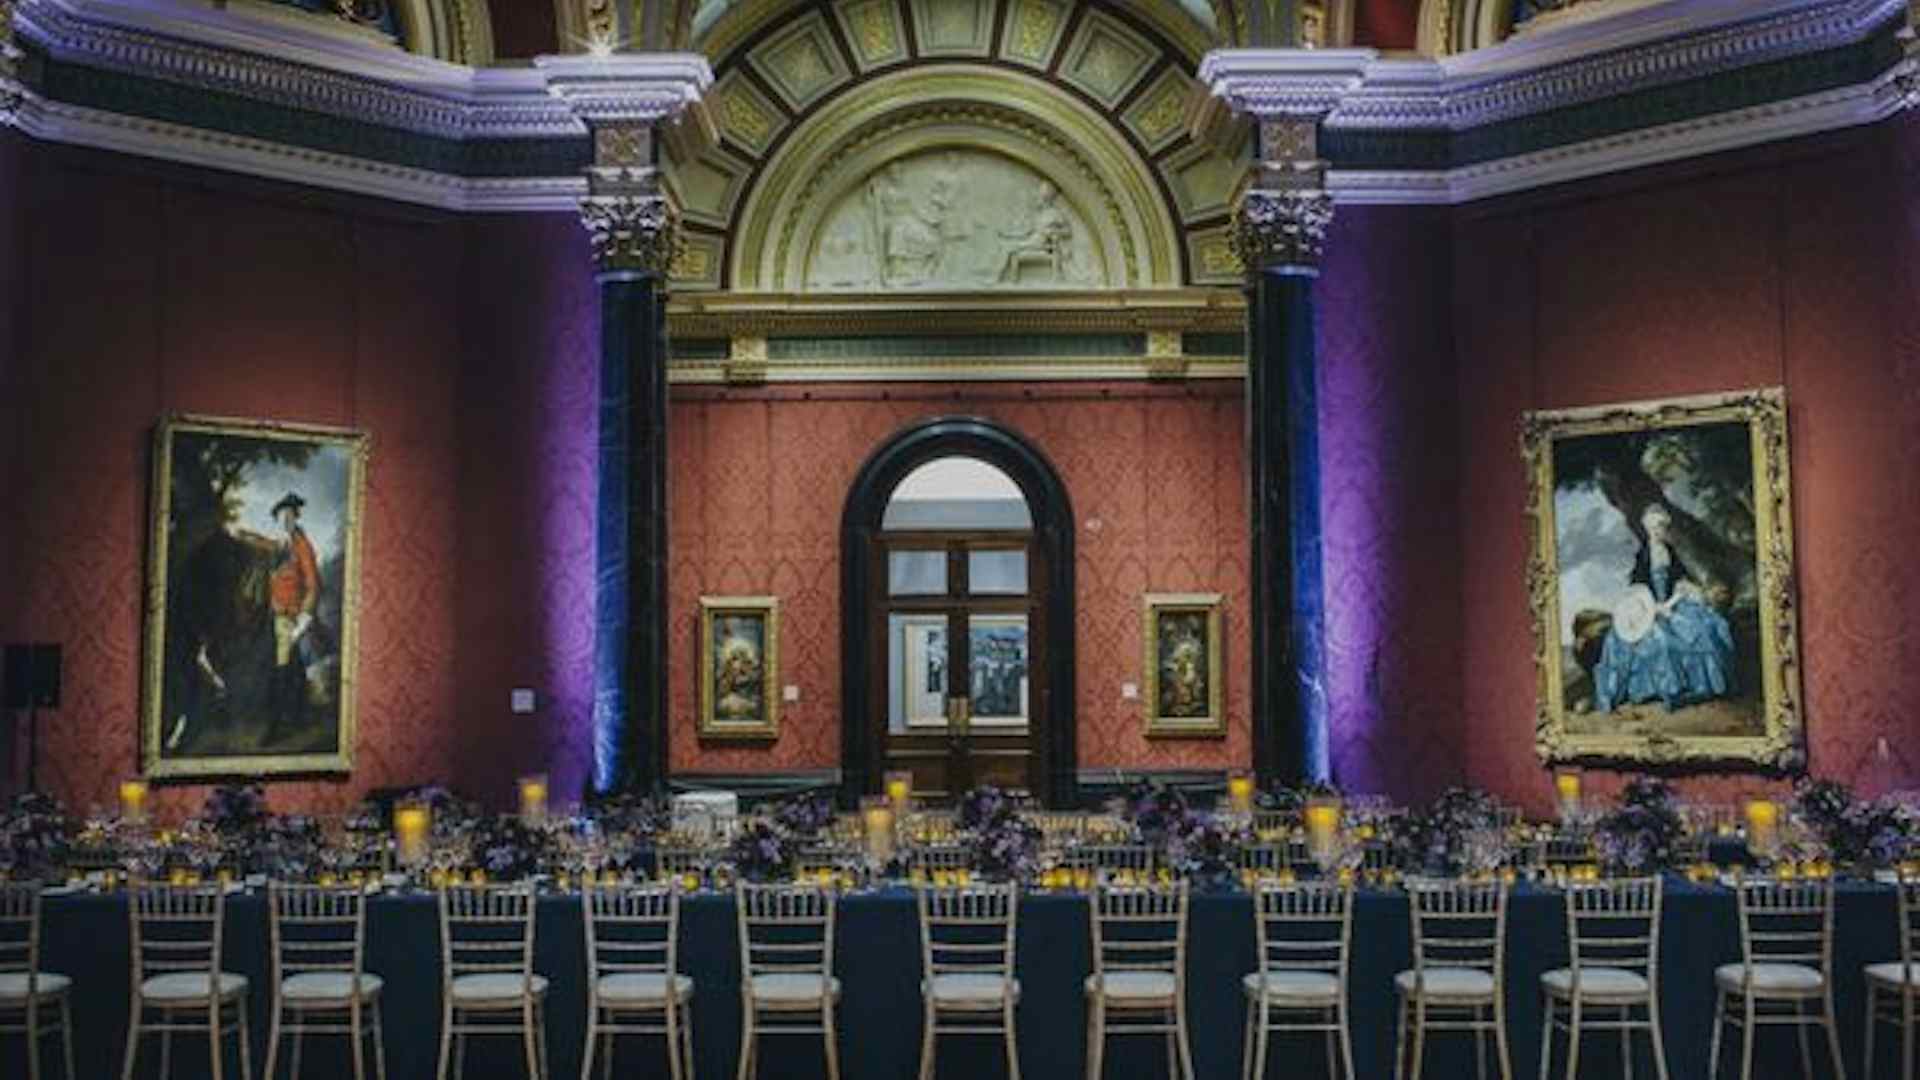 Picture This: A Spectacular Conference at The National Gallery